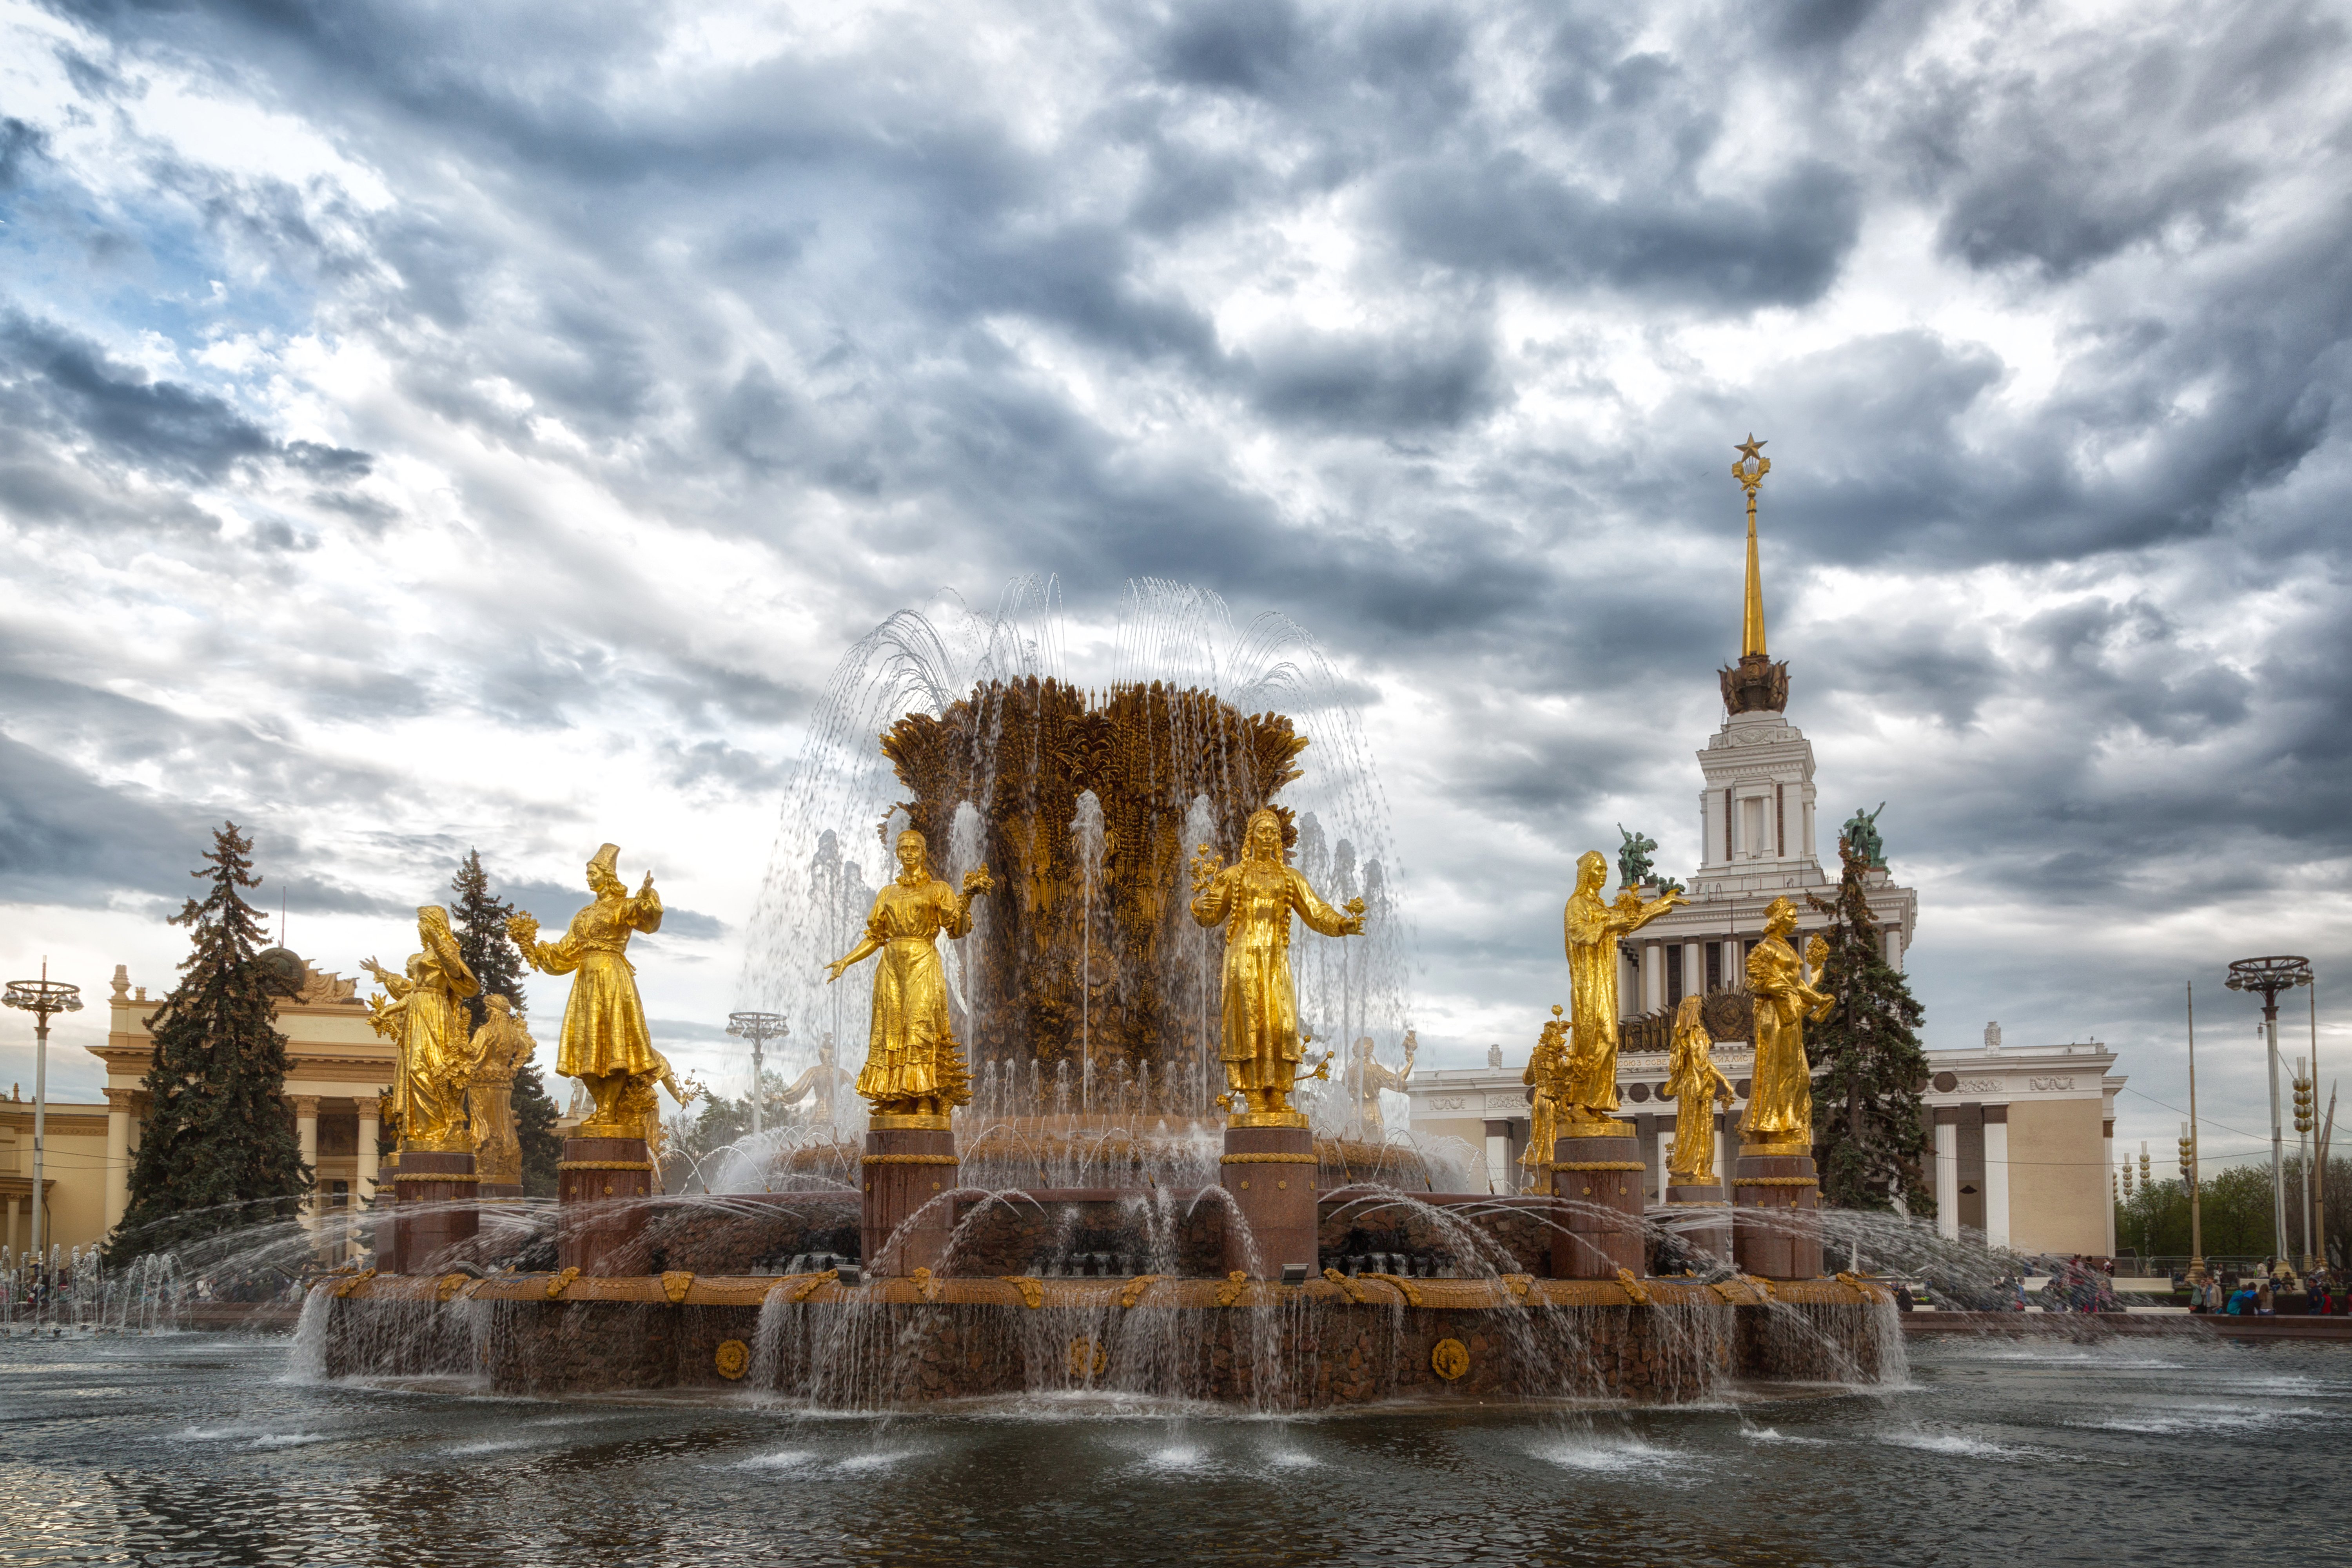 russia, Moscow, Parks, Fountain, Sculptures, Clouds, Vdnh, Cities Wallpaper